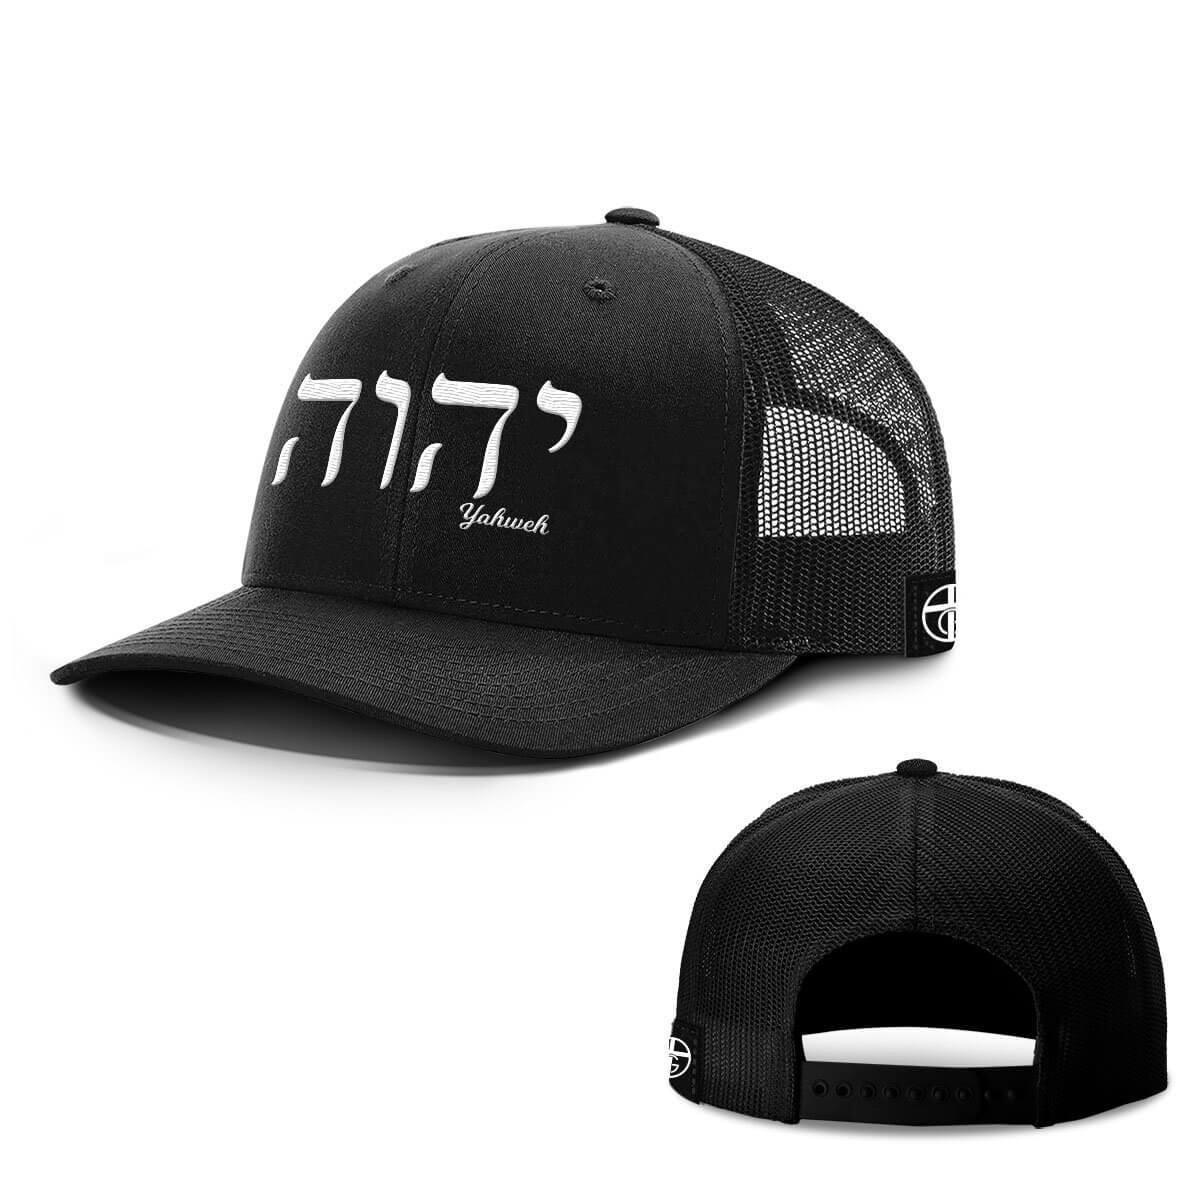 Yahweh Hats - Our True God